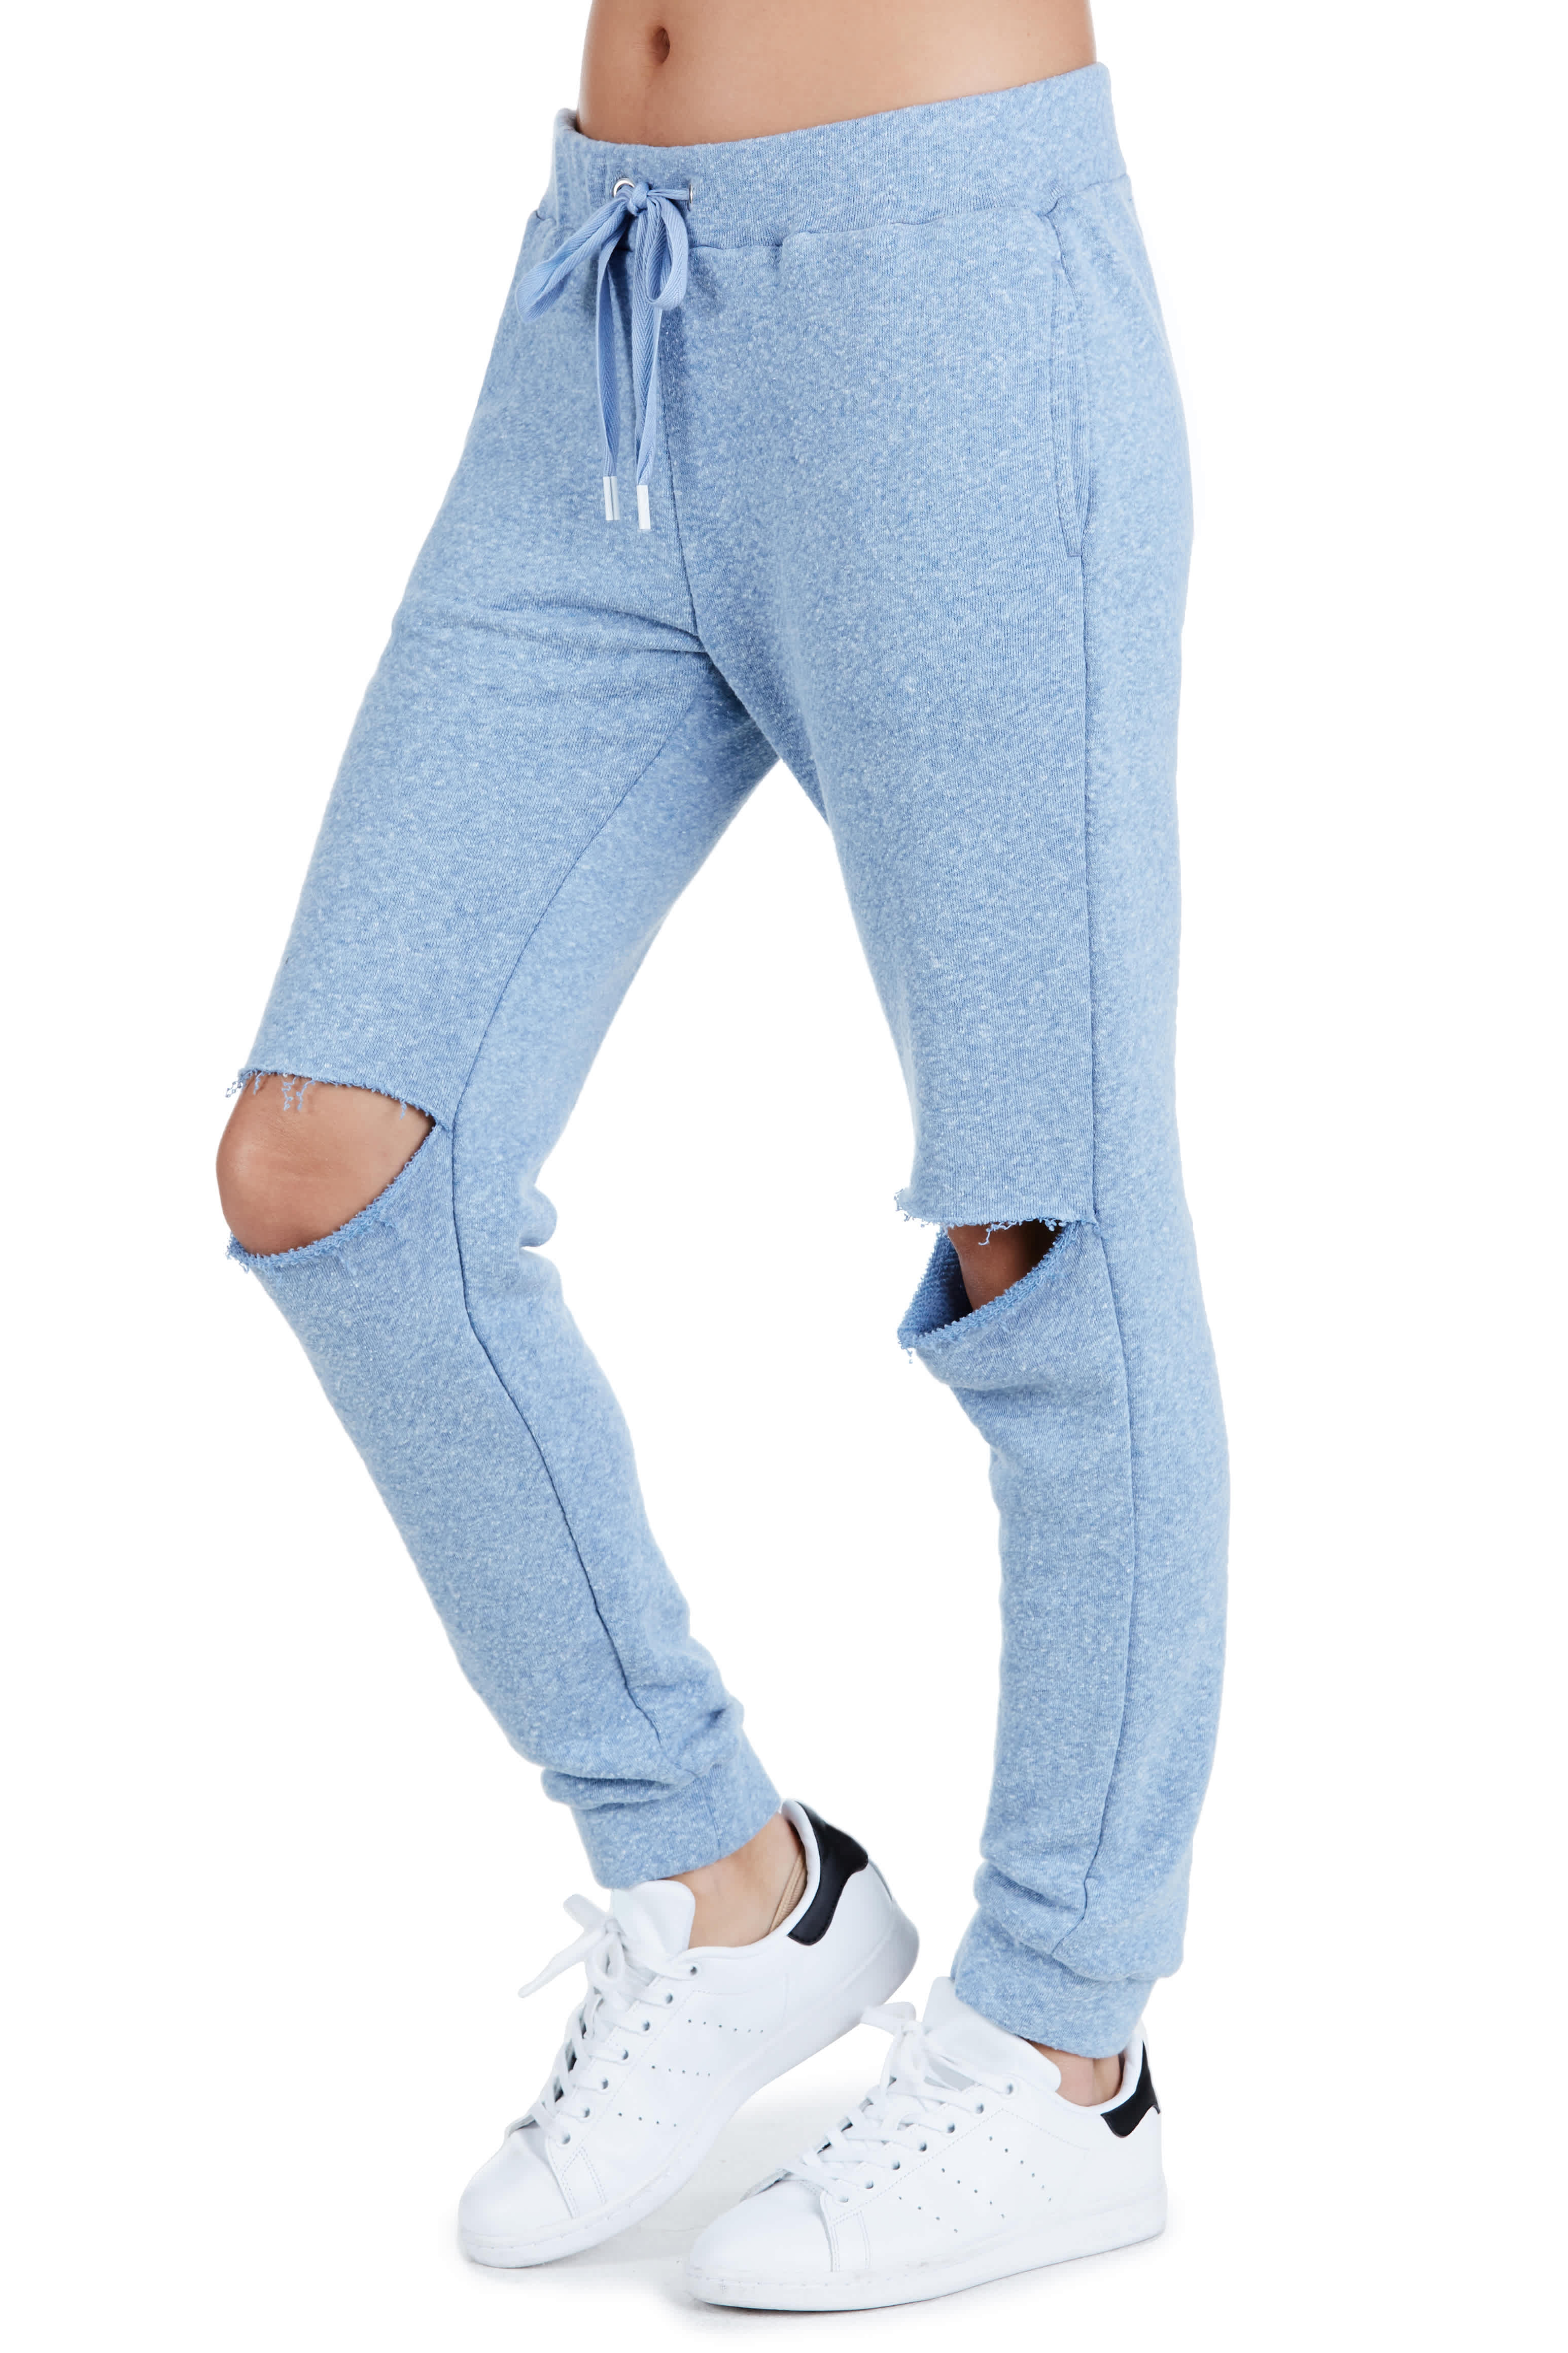 OYSTER KNEE JOGGER WOMENS SWEATPANT